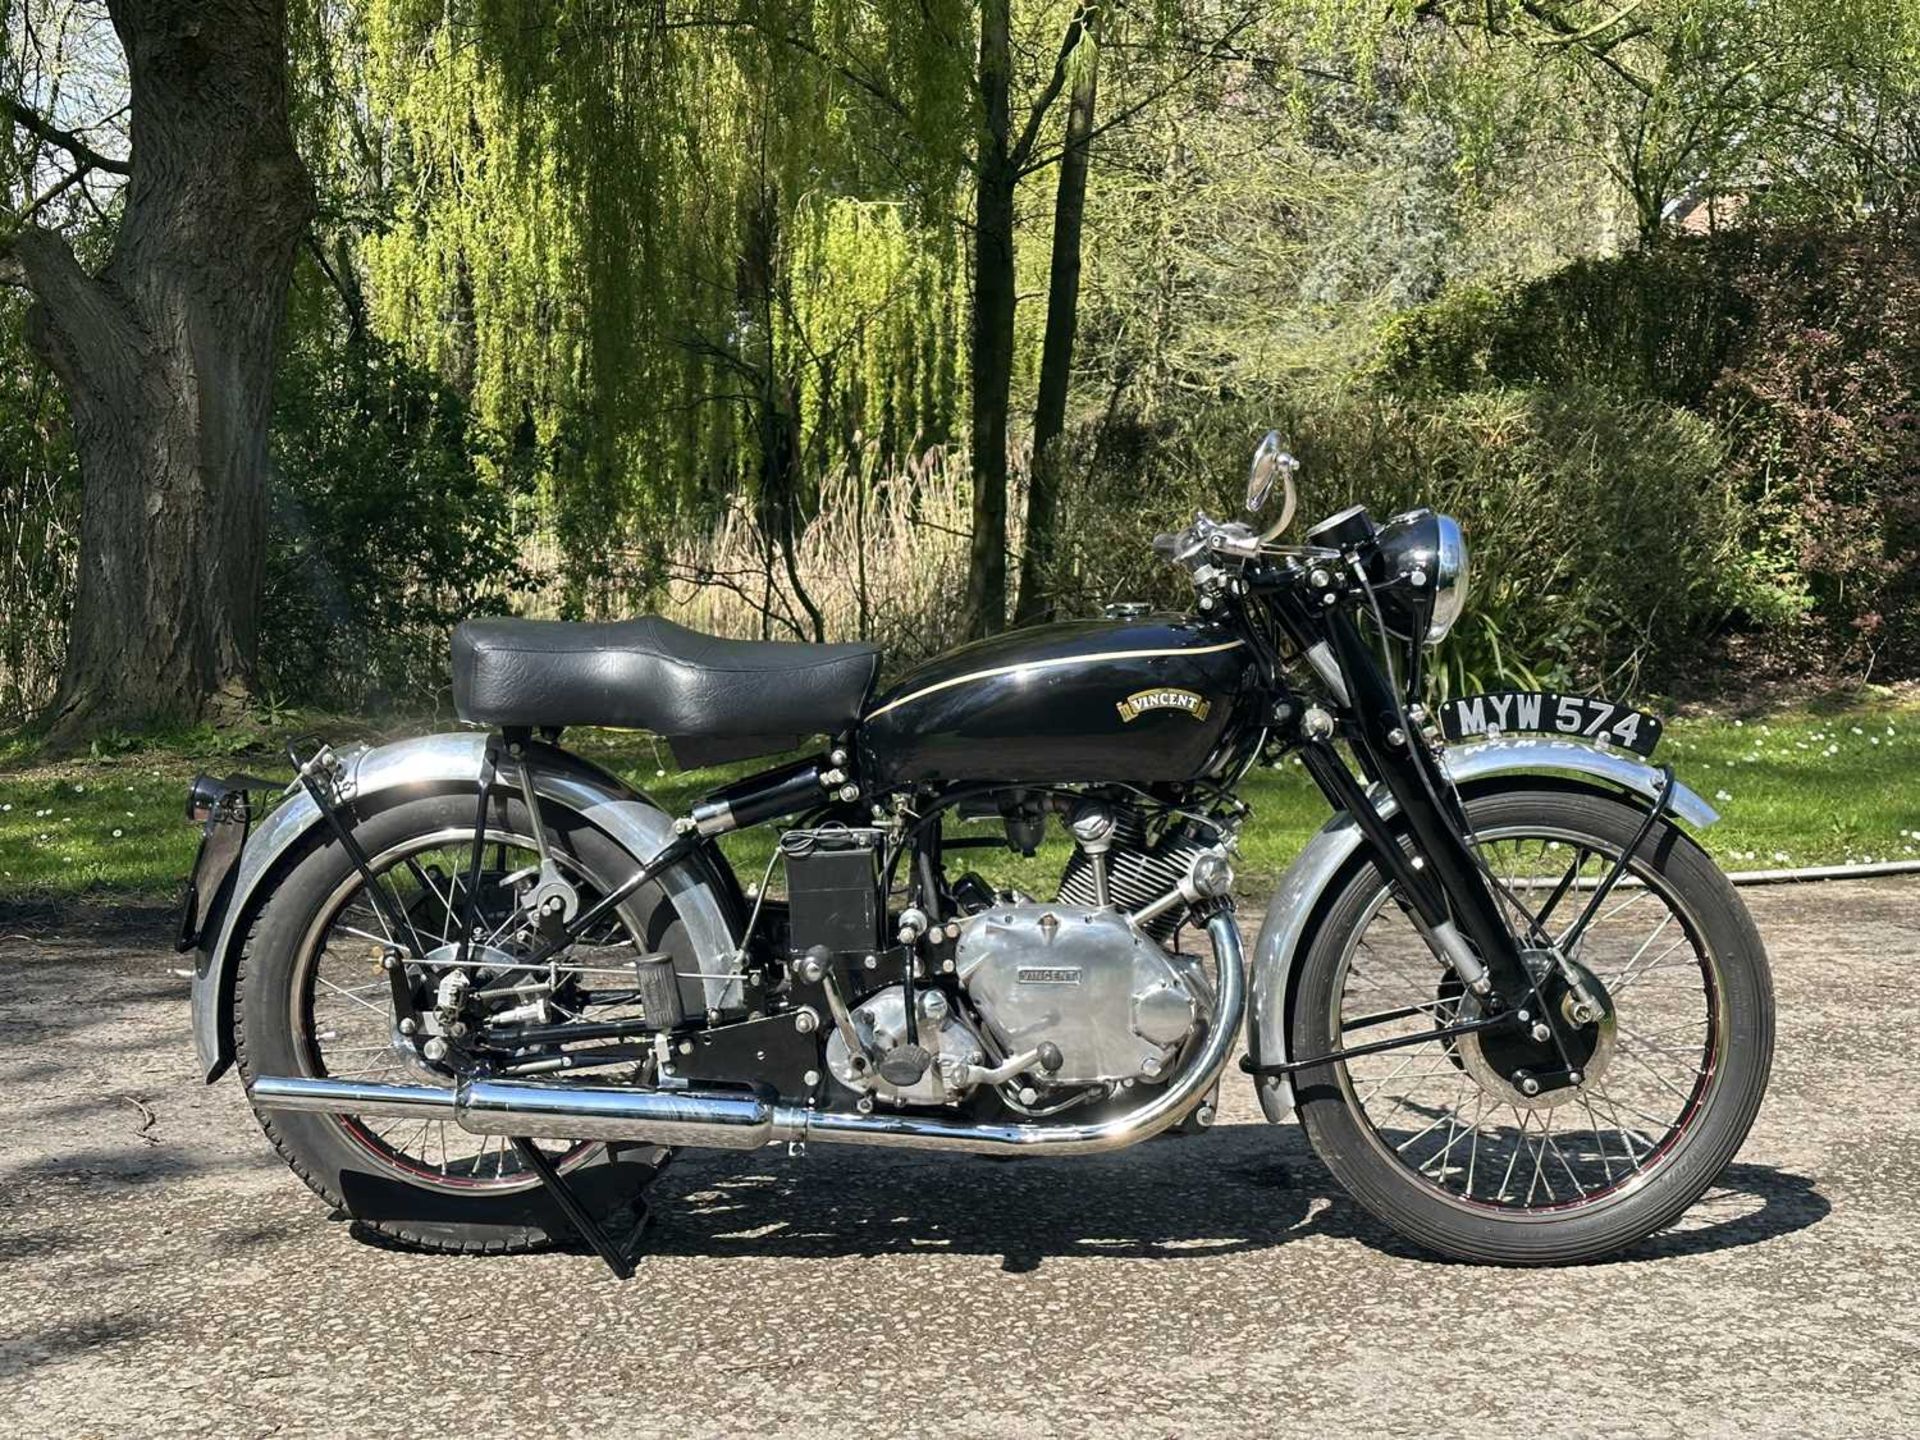 1952 Vincent Comet Comes with an old style log book and dating certificate from the Vincent Owners C